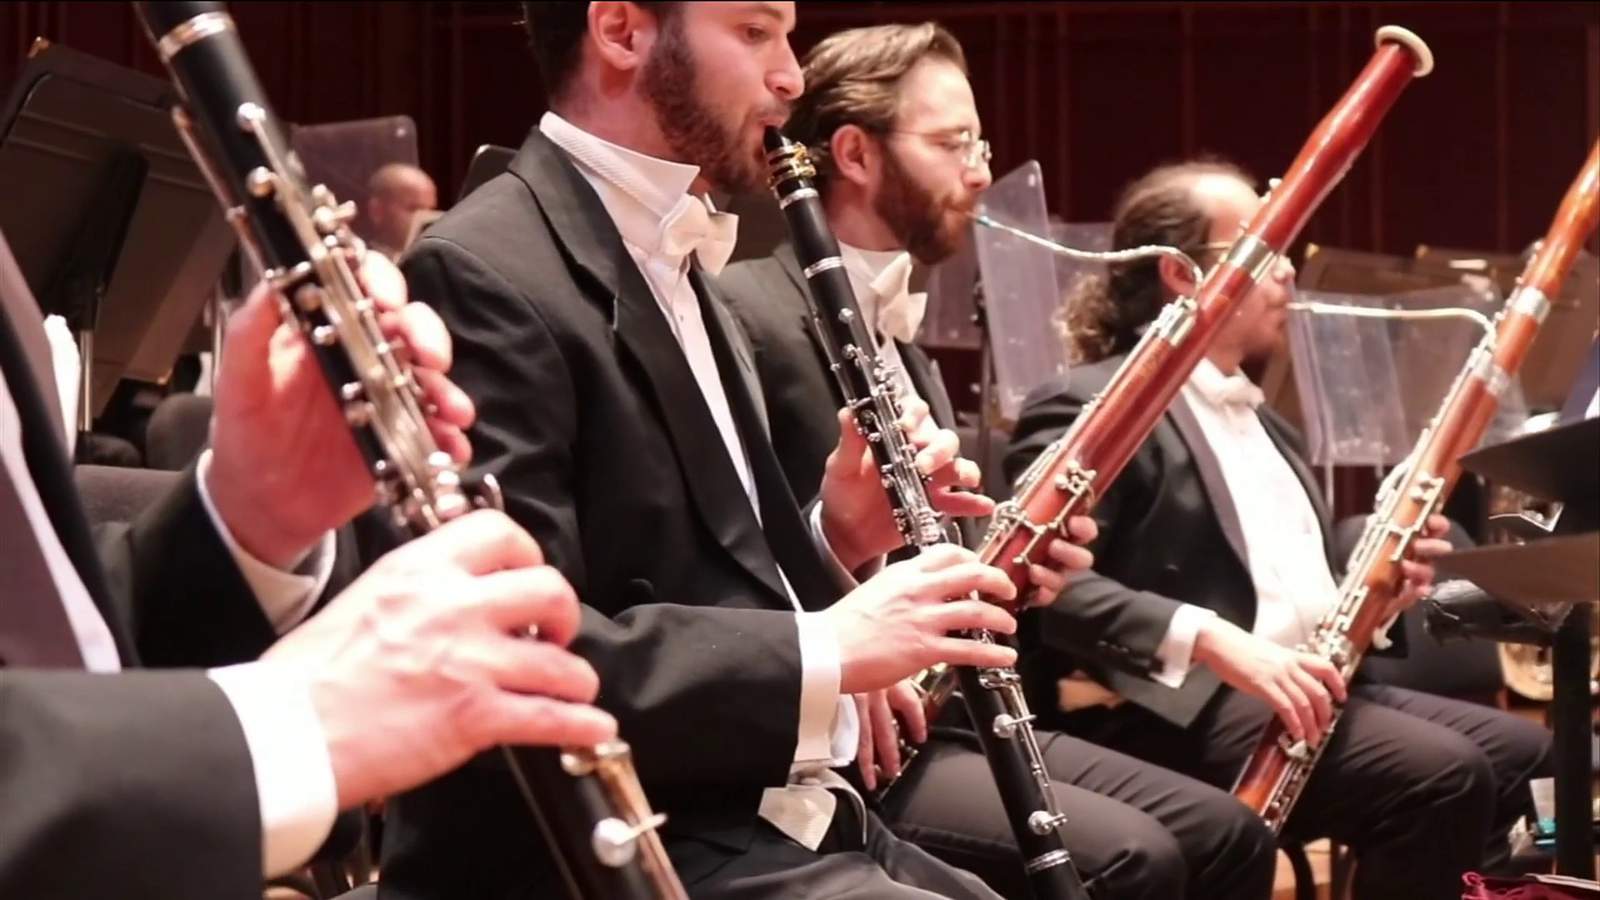 Jacksonville Symphony offers free tickets to active U.S. military members, veterans